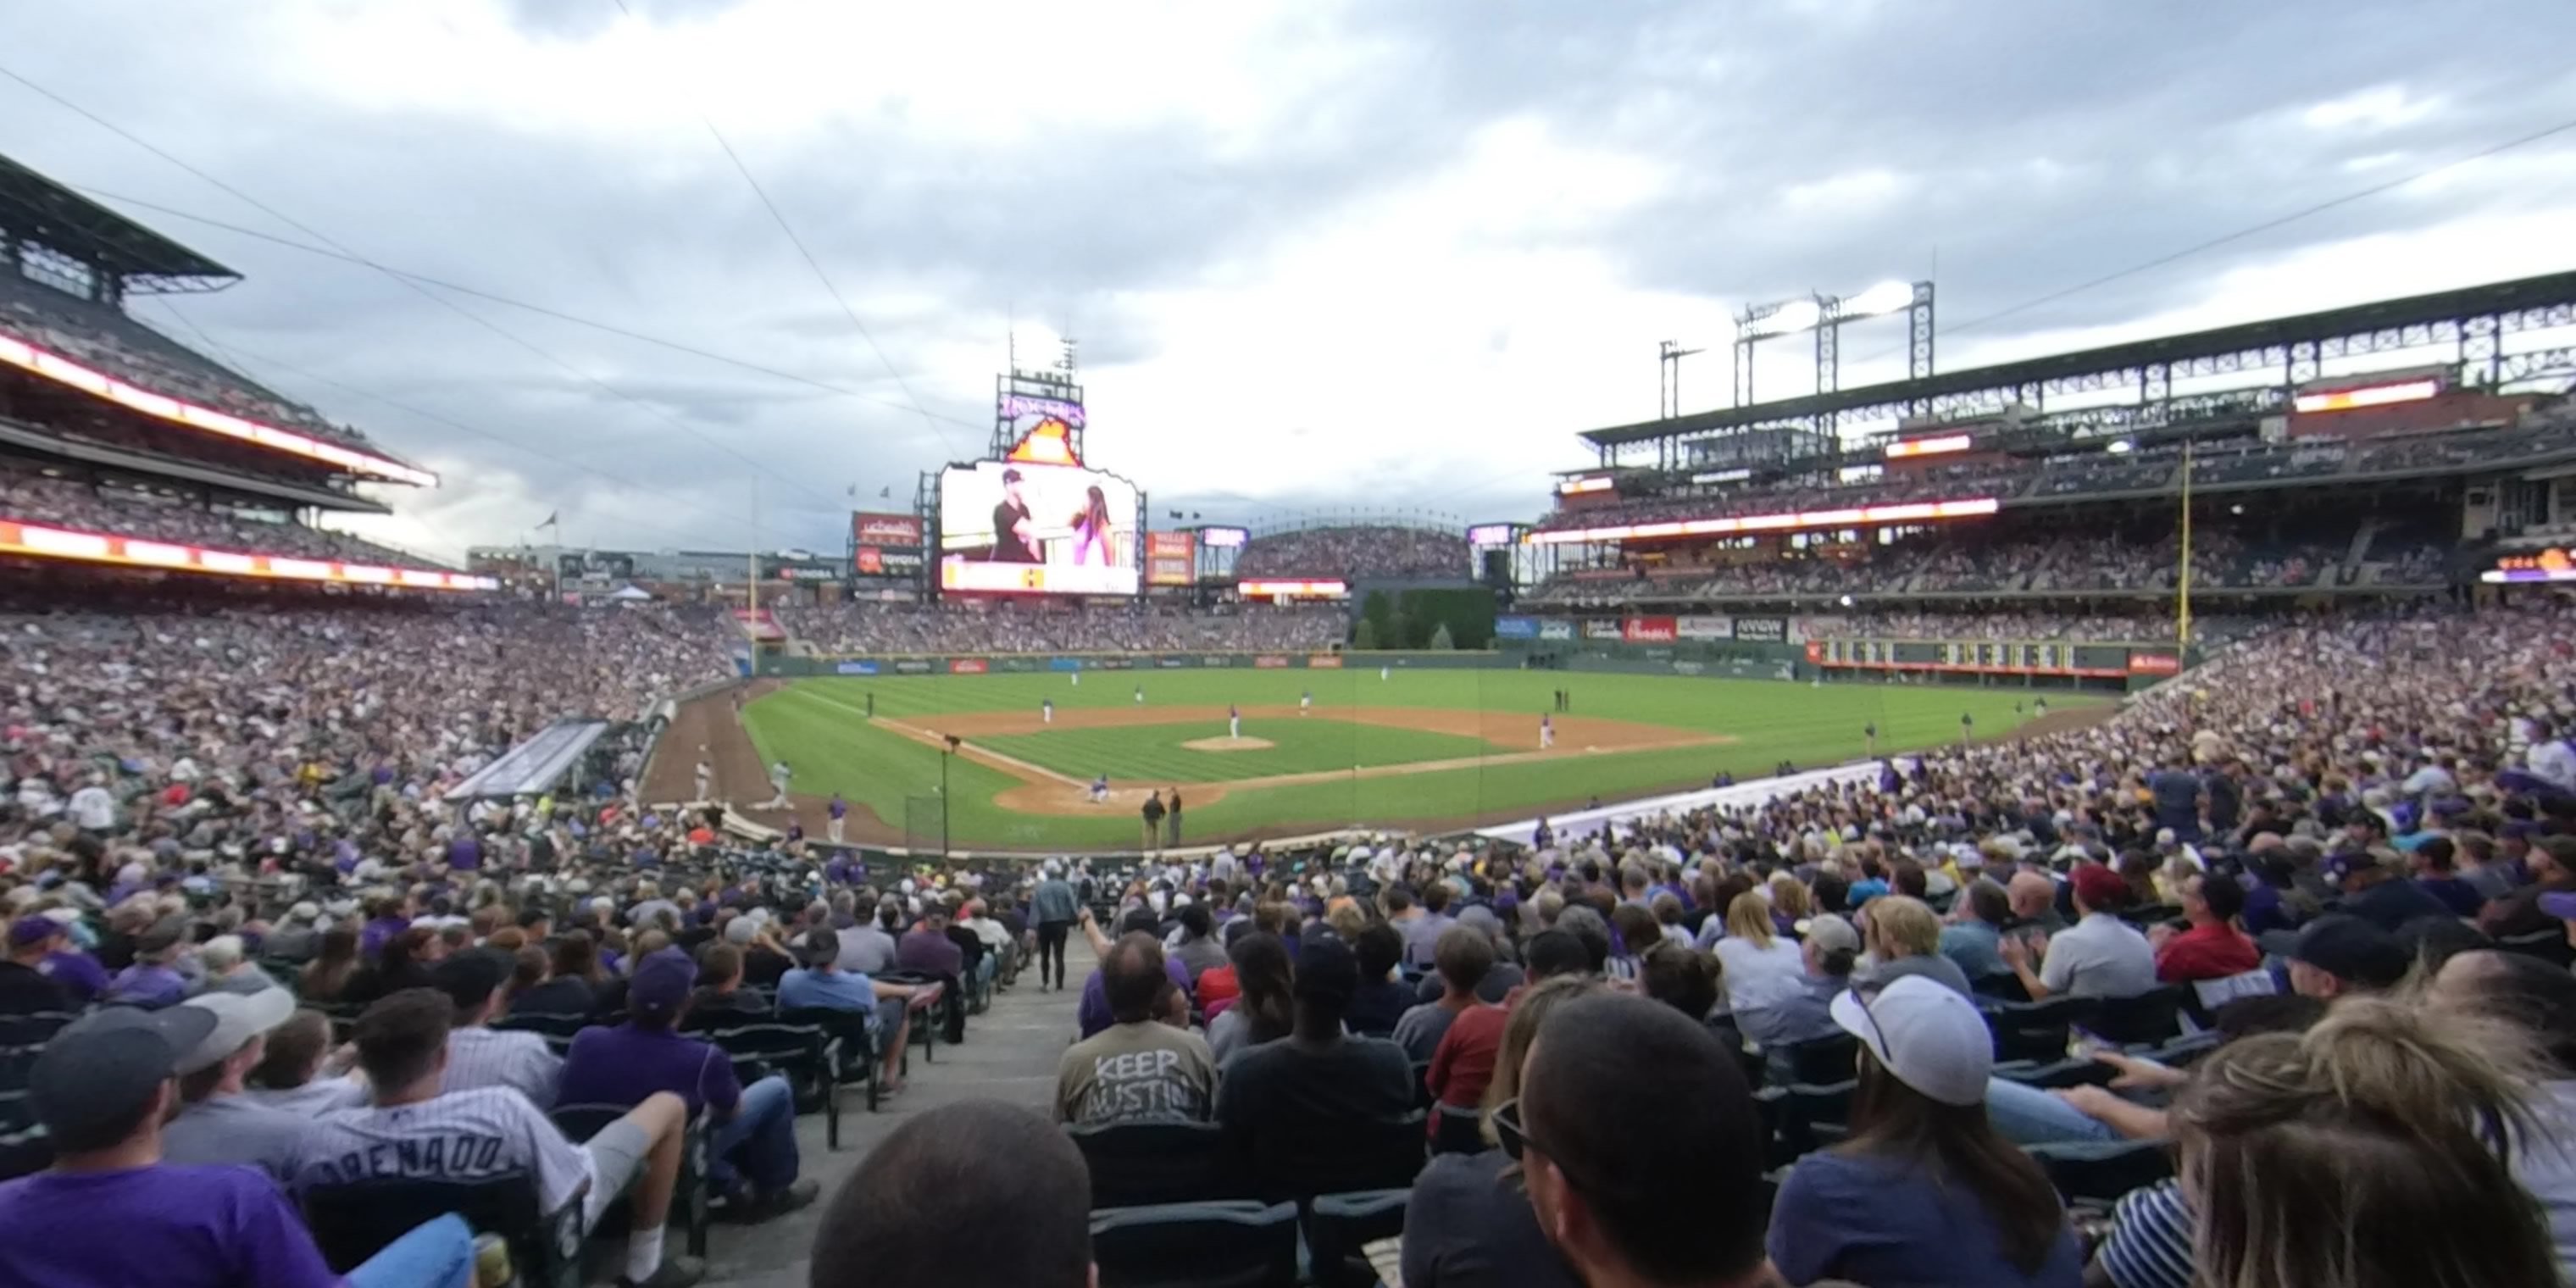 Section 129 At Coors Field Rateyourseats Com